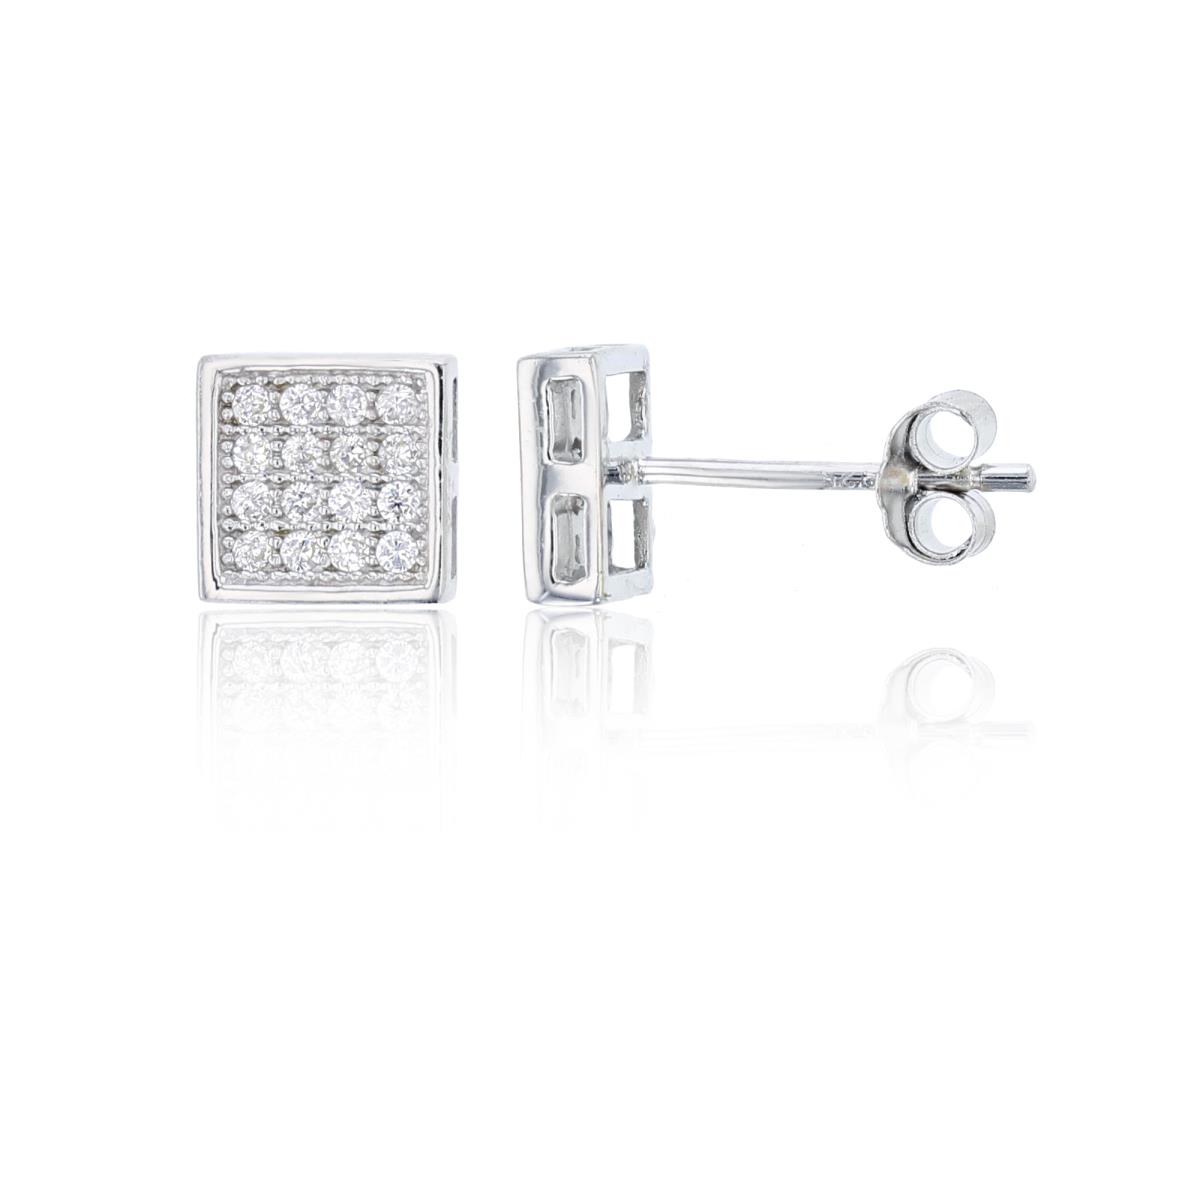 Sterling Silver 6.7mm Pave Square Stud Earring